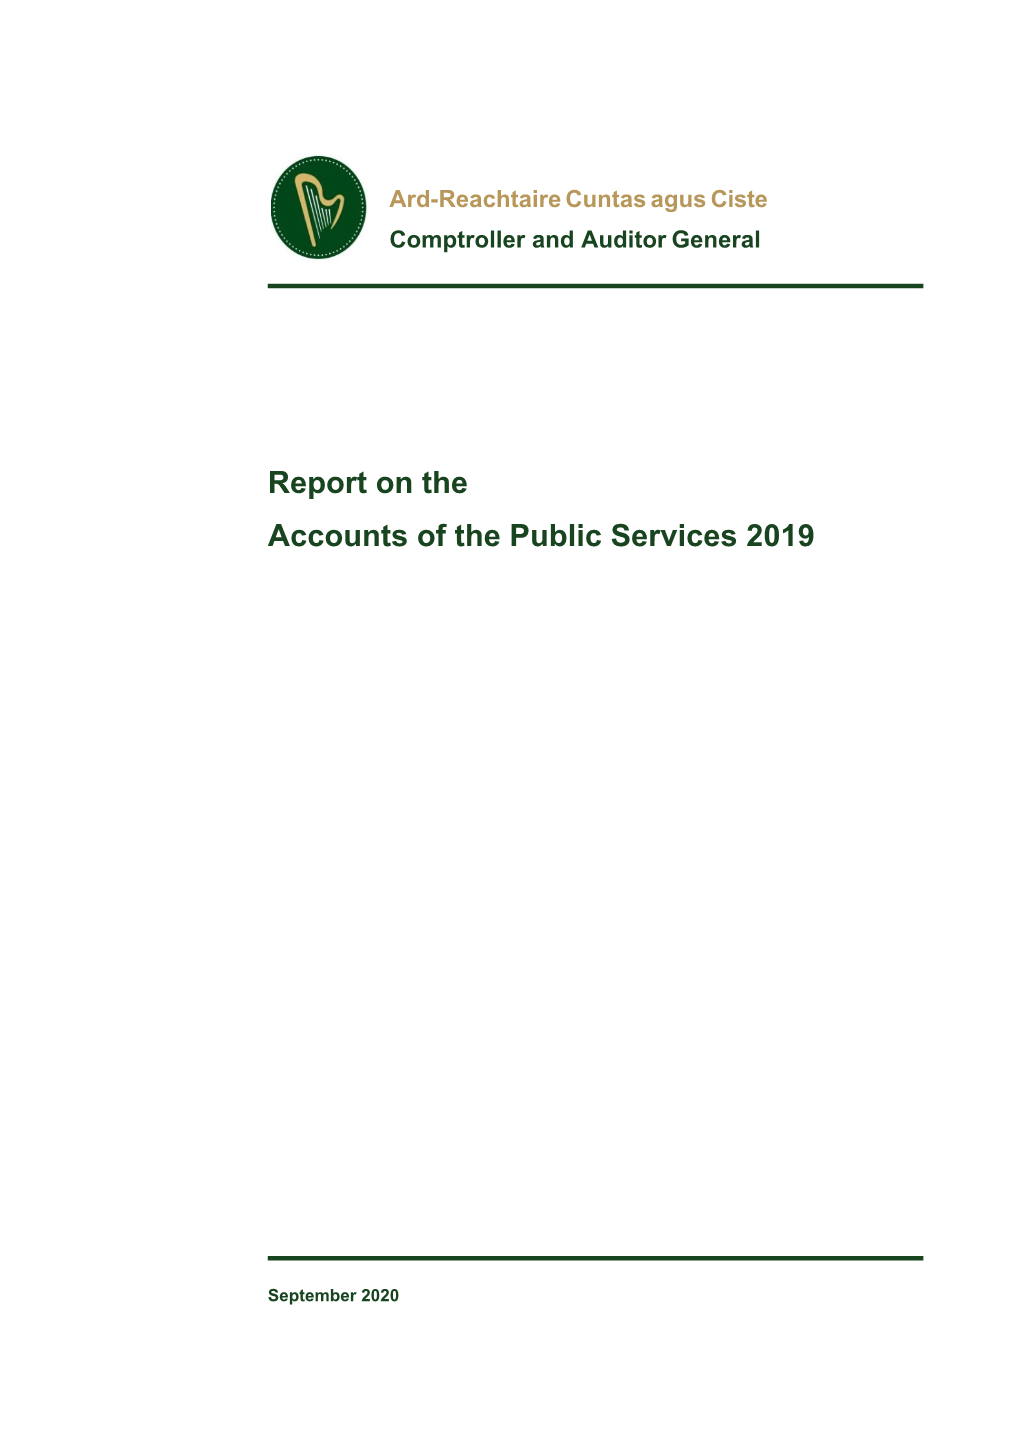 Report on the Accounts of the Public Services 2019